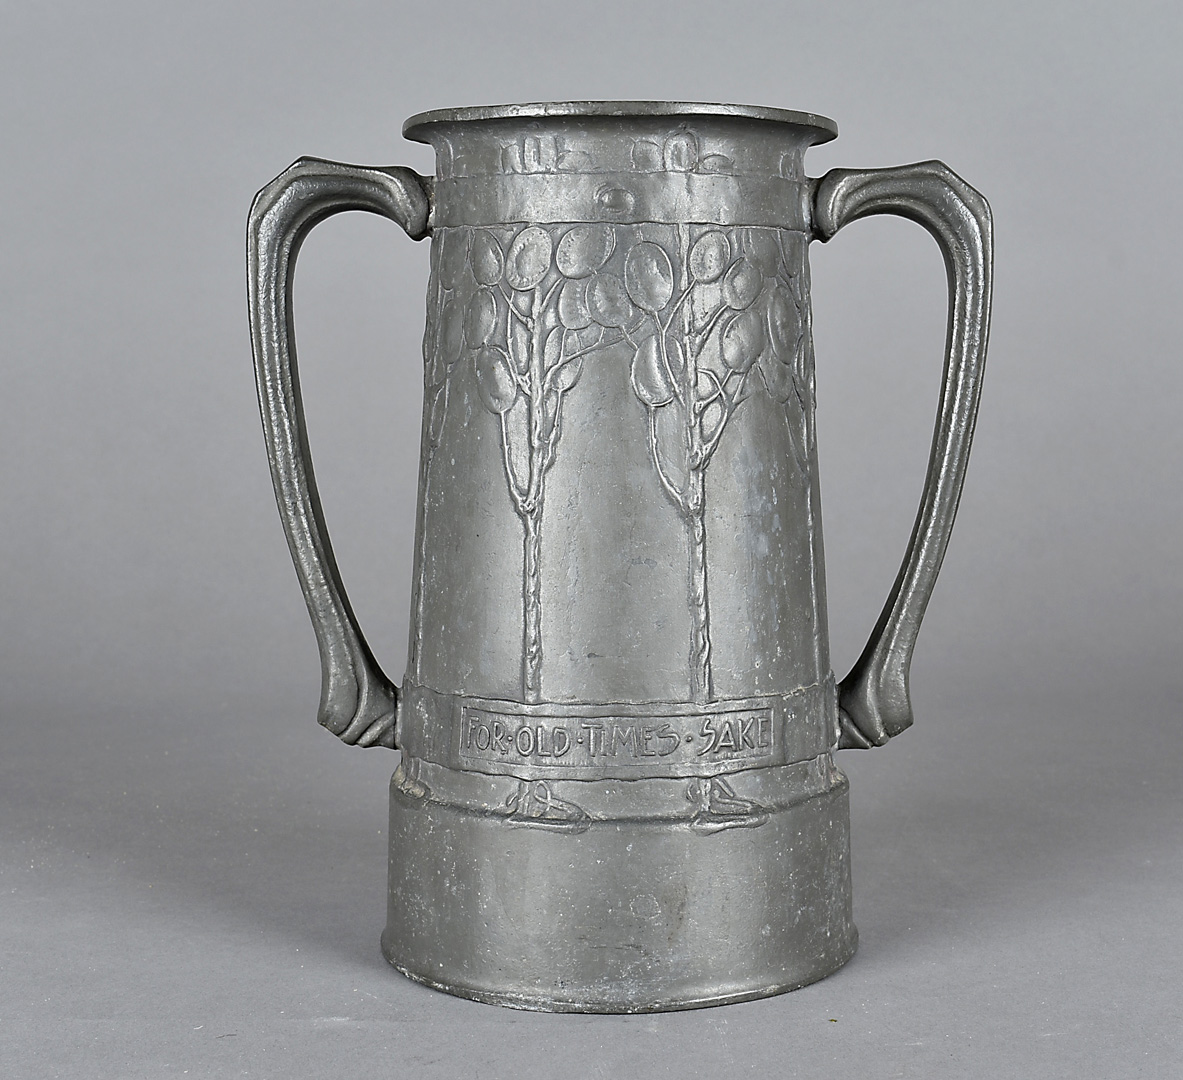 A Liberty & Co pewter Tudric loving cup, designed by David Veazey with Honesty plants and motto 'For